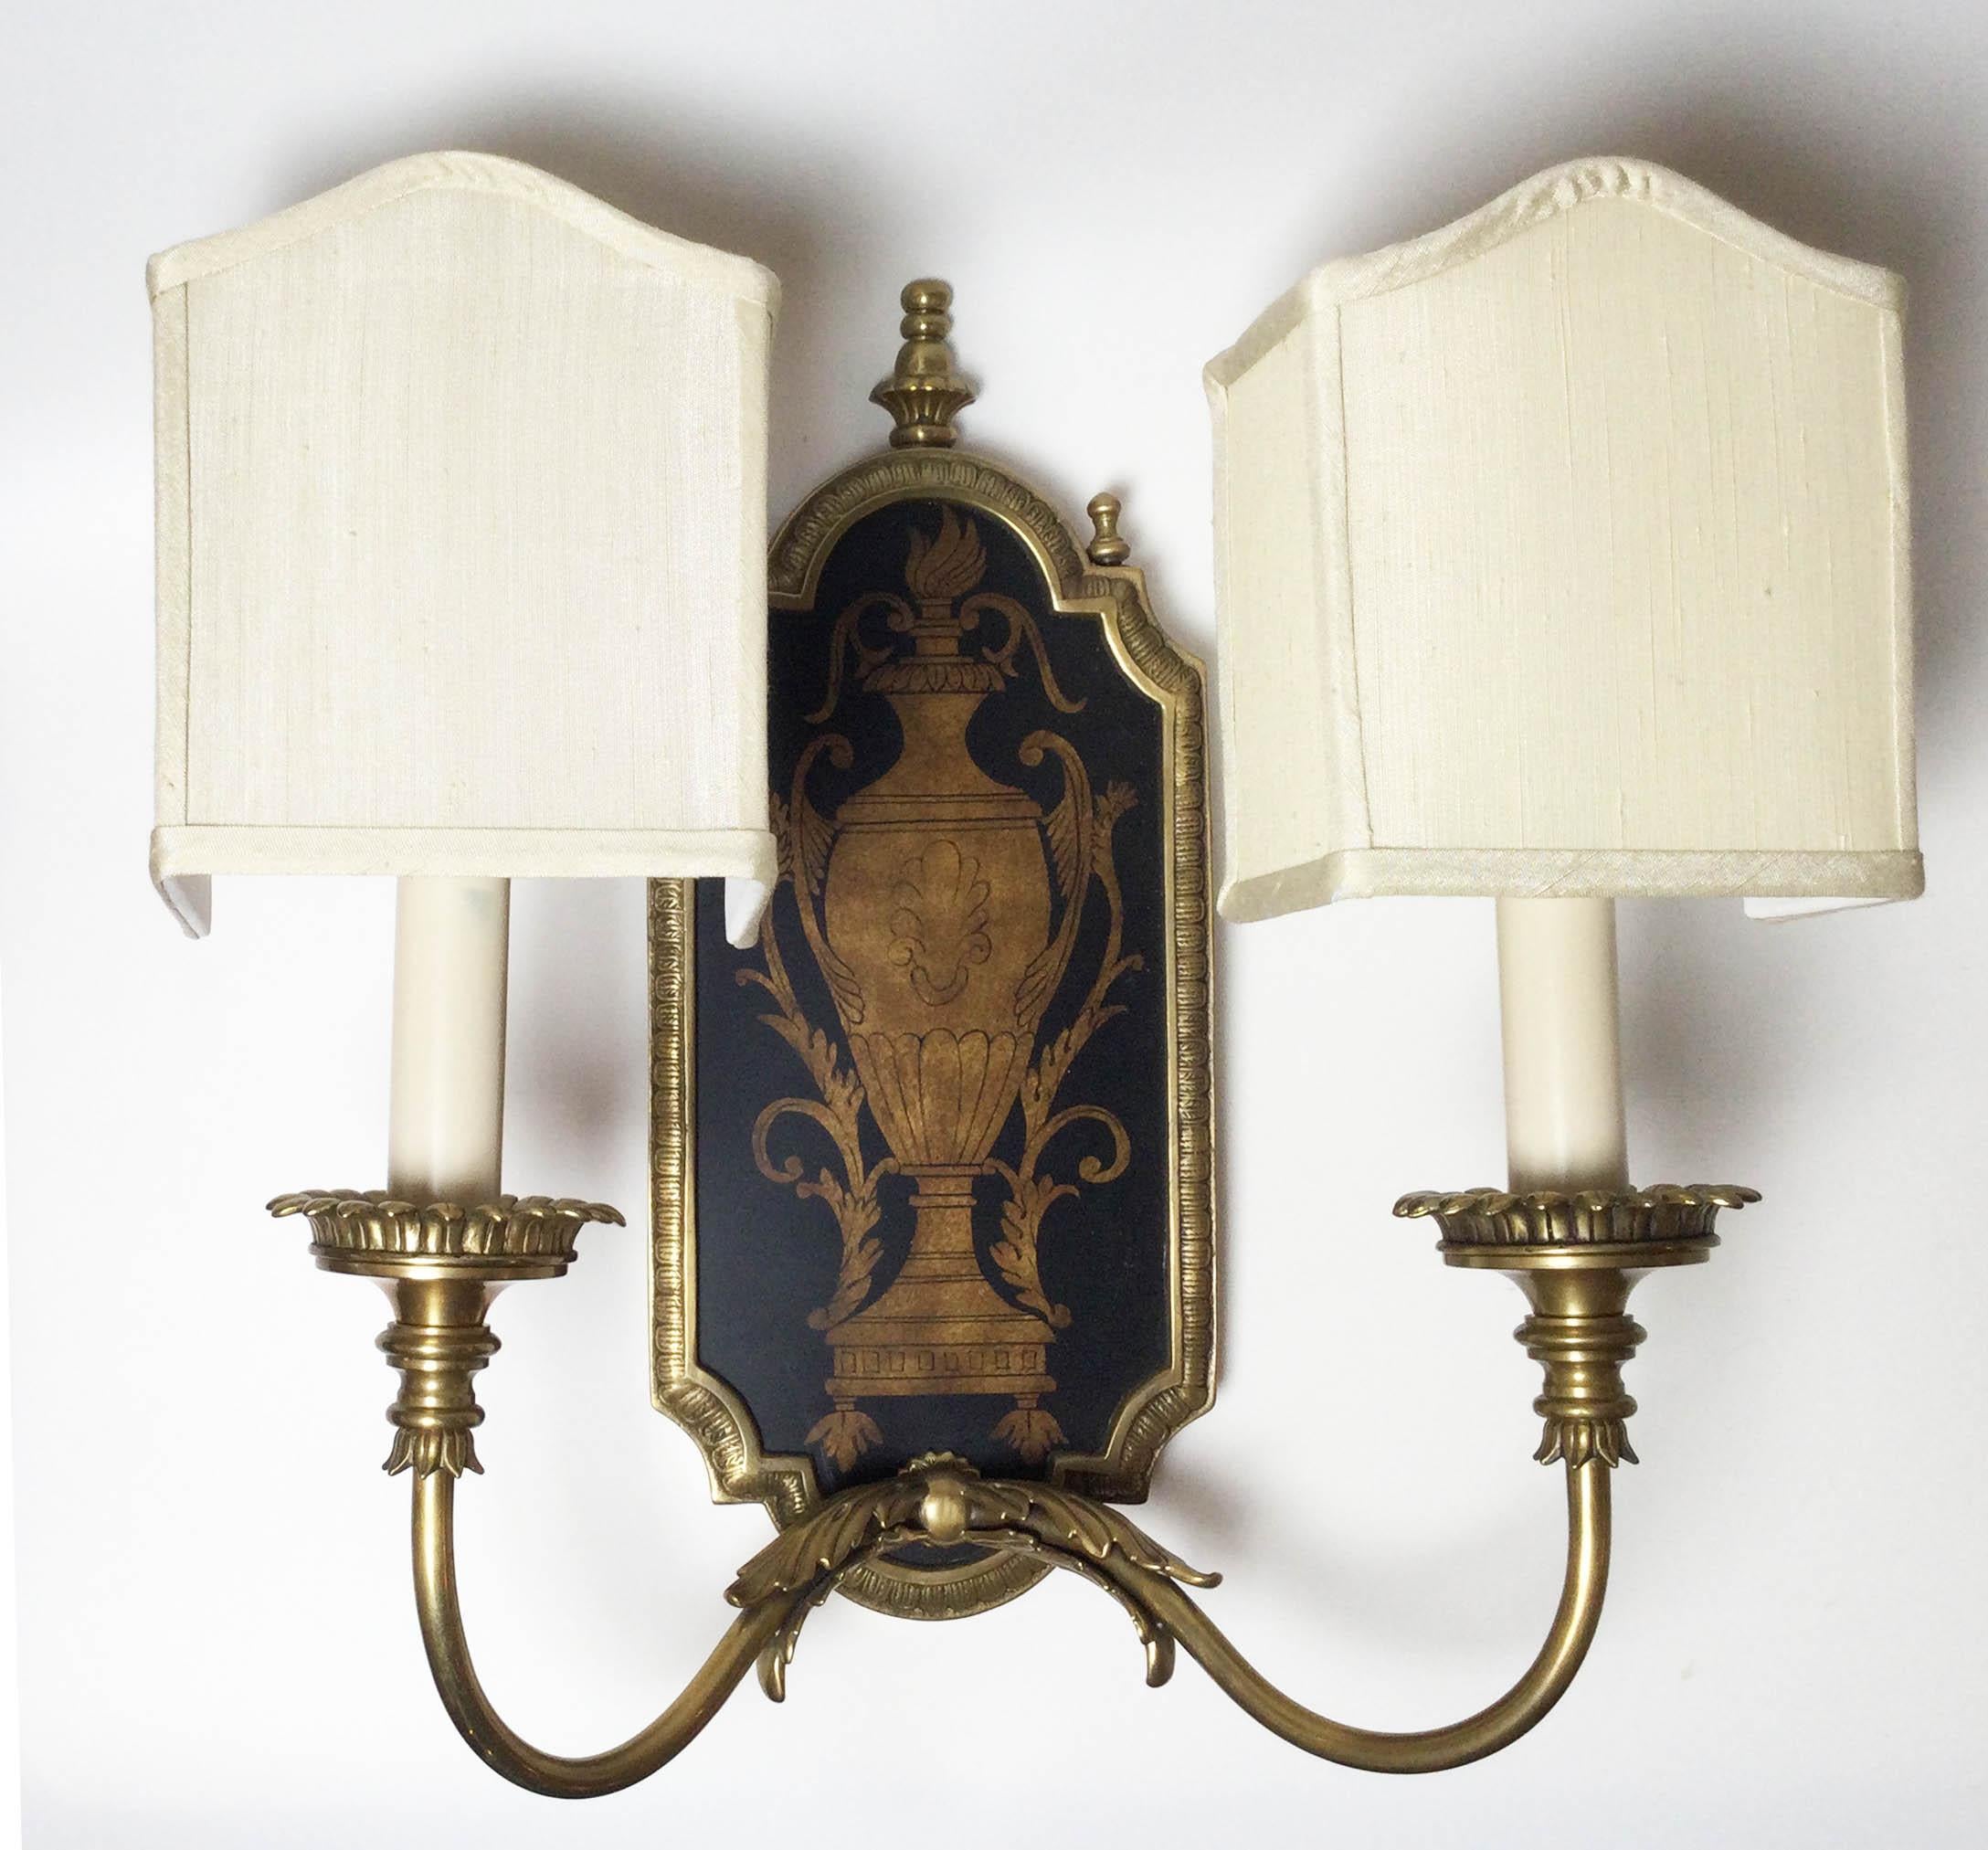 An elegant pair or antiqued brass two light sconces with wood panel back plate with urn design. Complete with four box shaped shantung silk shades . These are modern new wiring. measures 15.5 tall, 14.5 wide (with shades) 6.5 deep. 13 inches wide